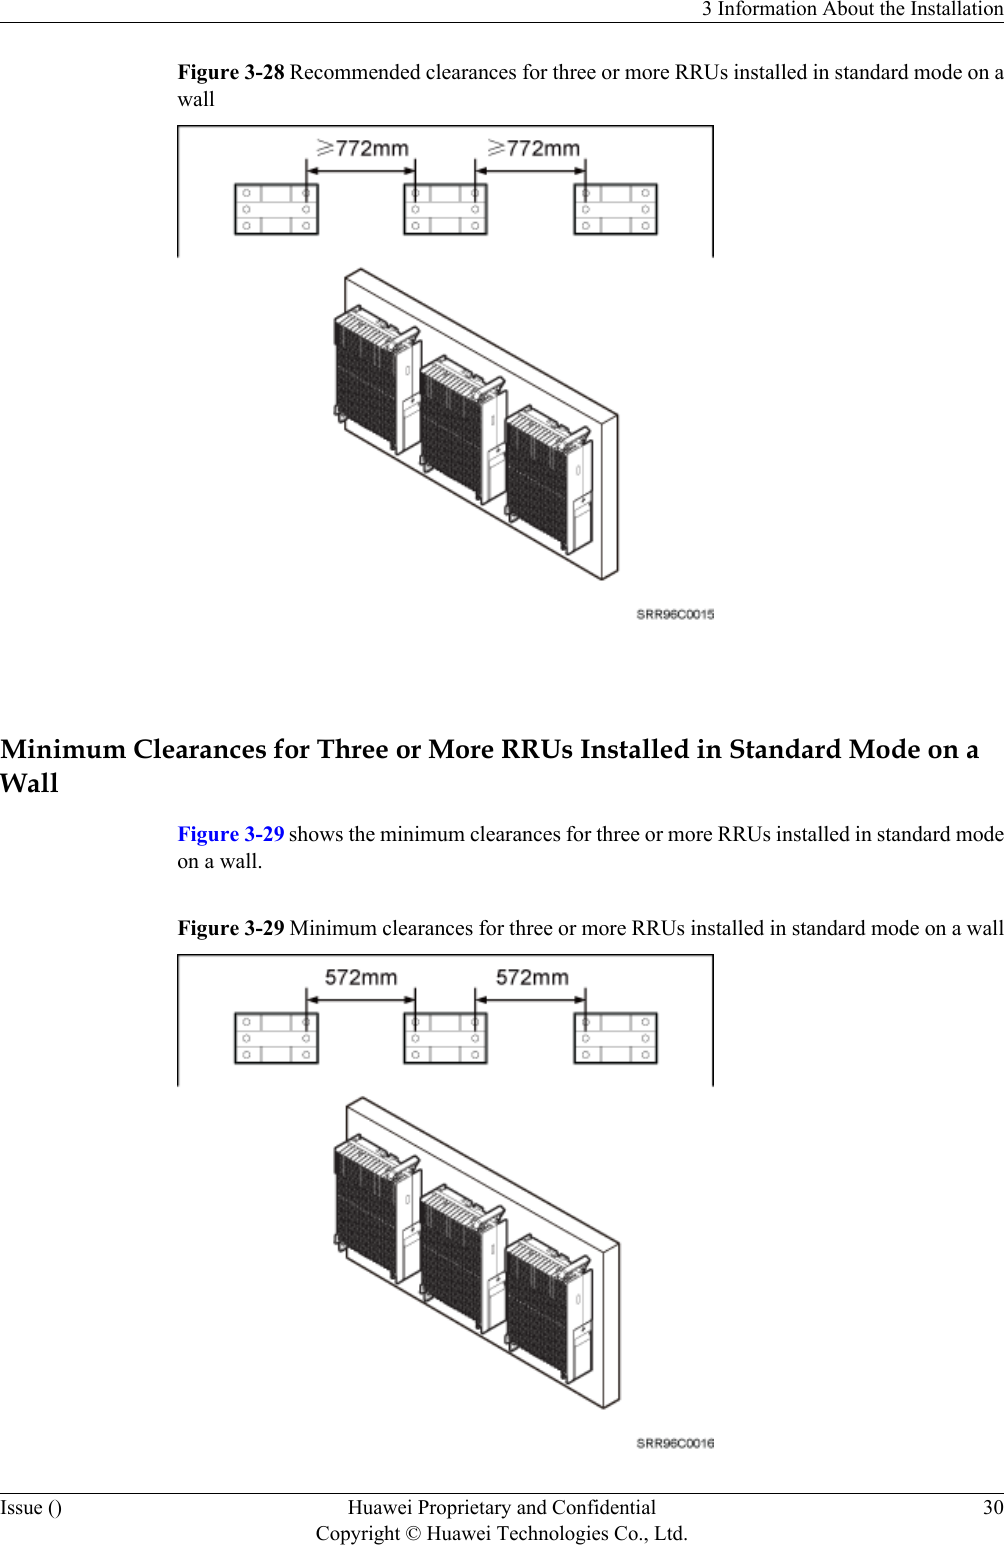 Figure 3-28 Recommended clearances for three or more RRUs installed in standard mode on awall Minimum Clearances for Three or More RRUs Installed in Standard Mode on aWallFigure 3-29 shows the minimum clearances for three or more RRUs installed in standard modeon a wall.Figure 3-29 Minimum clearances for three or more RRUs installed in standard mode on a wall3 Information About the InstallationIssue () Huawei Proprietary and ConfidentialCopyright © Huawei Technologies Co., Ltd.30